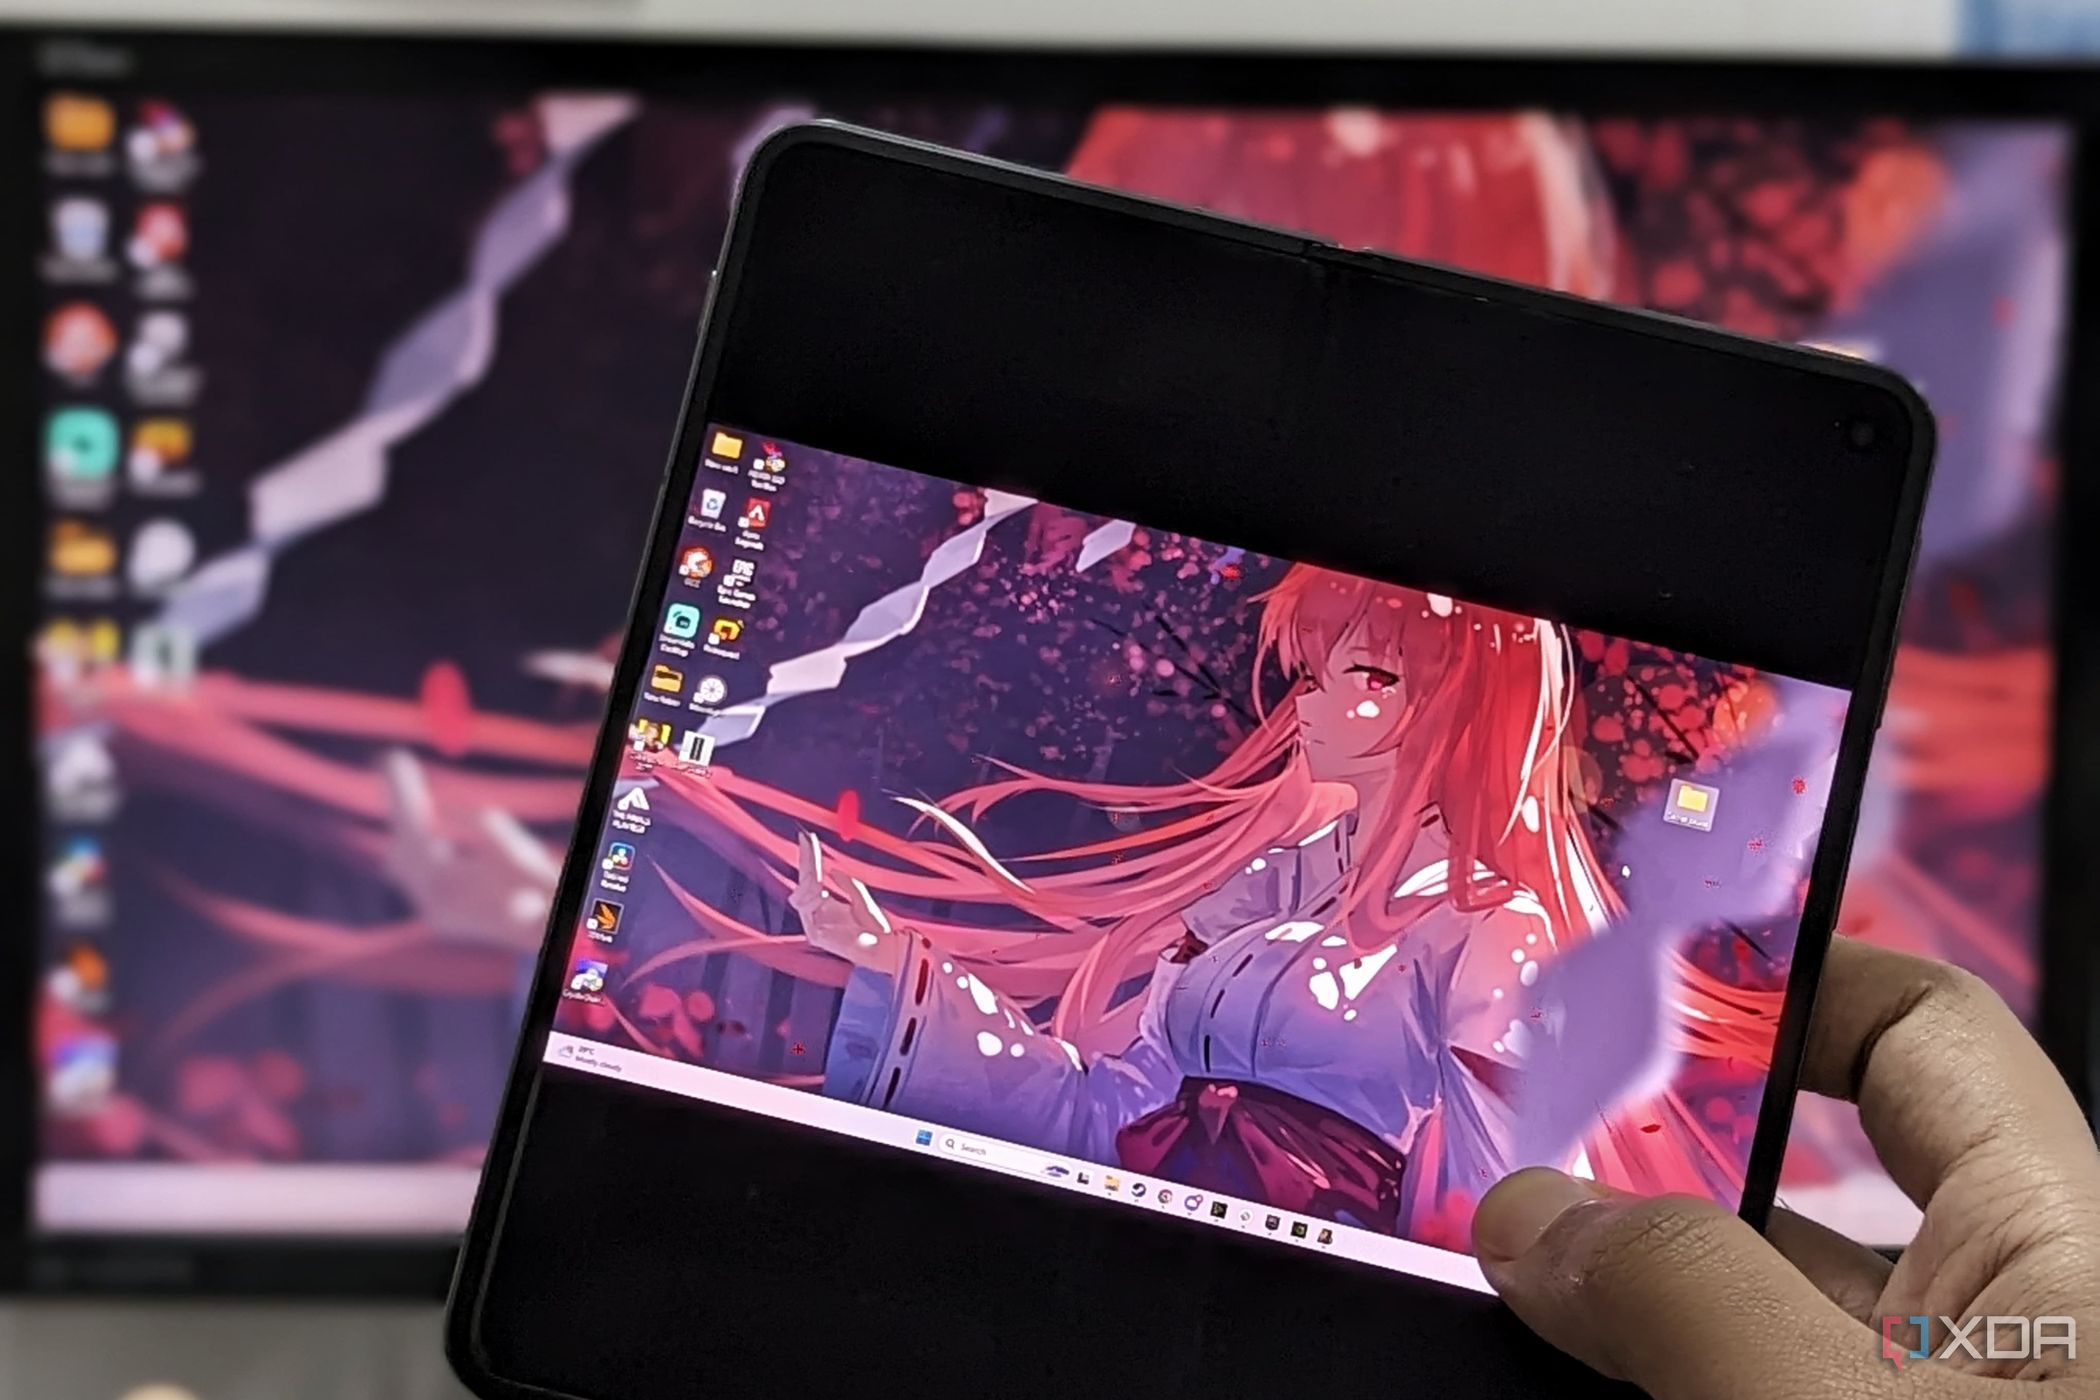 An image showing a person holding a phone displaying the Moonlight app running desktop mirror.